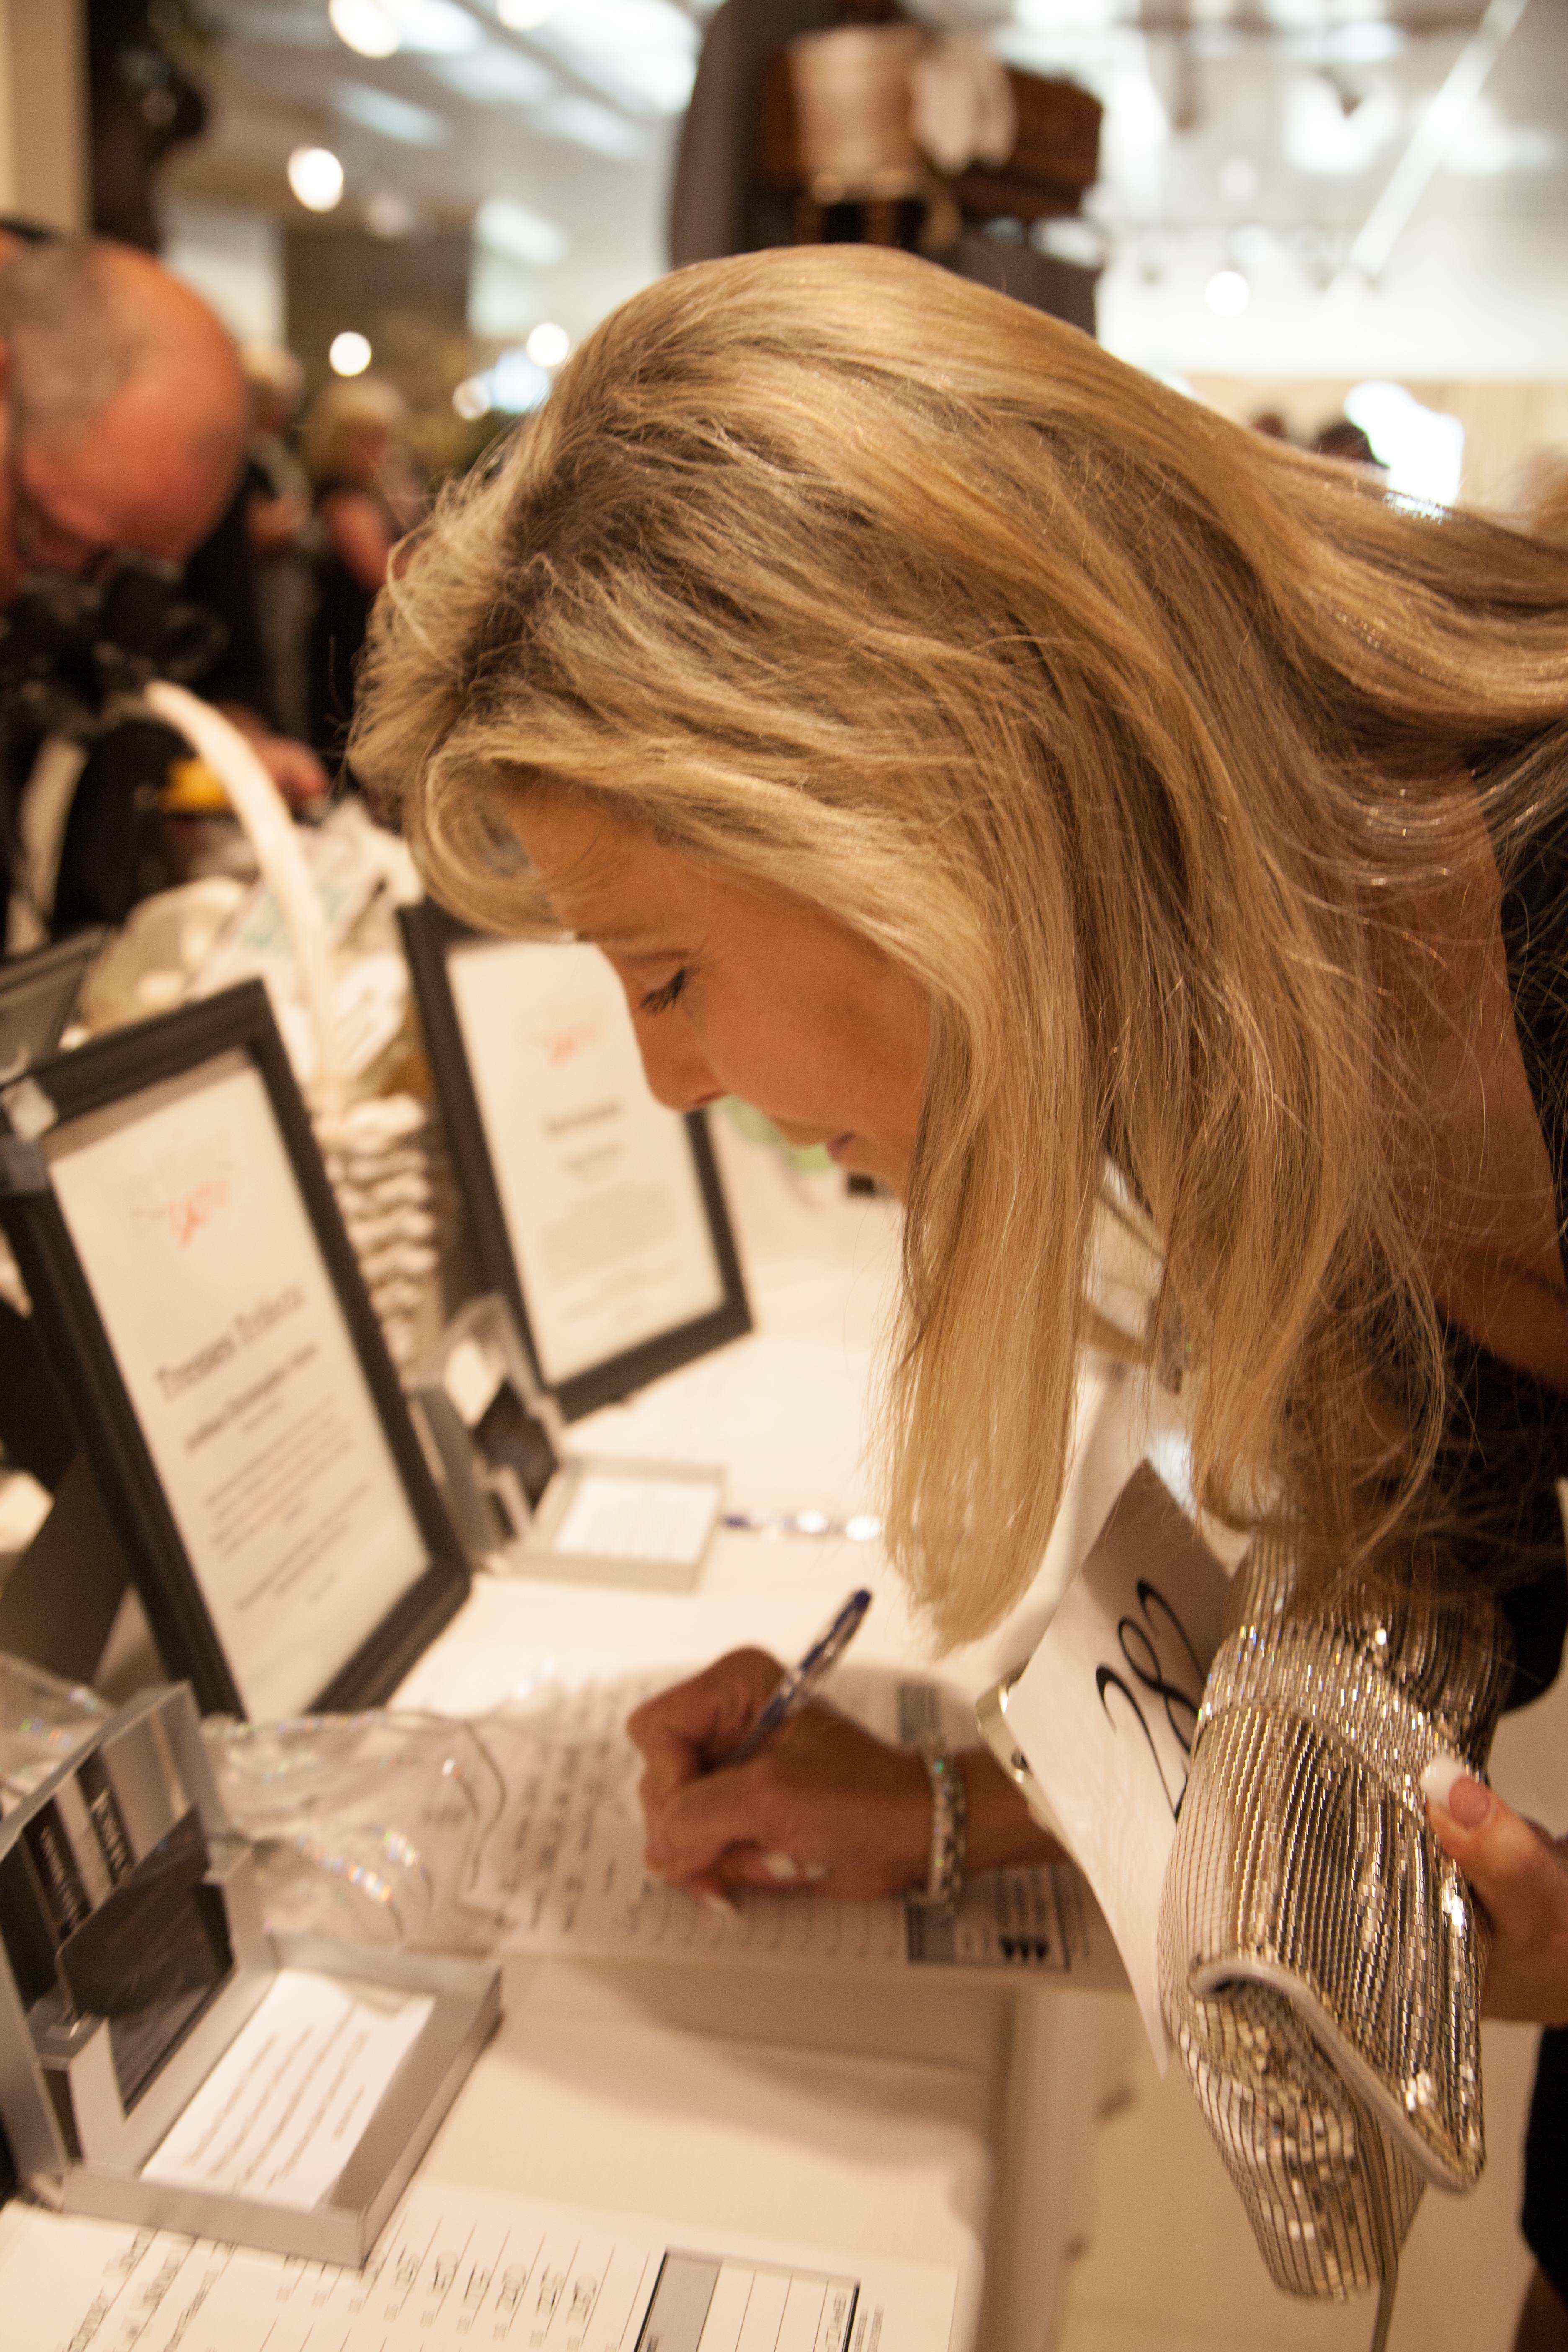 Diana Sabatino, Owner of DIANA & Company Jewelry Designs and one of Riviera Magazine’s Dynamic Women of Orange County, securing a silent auction item at "Getting to Zero" Fundraiser